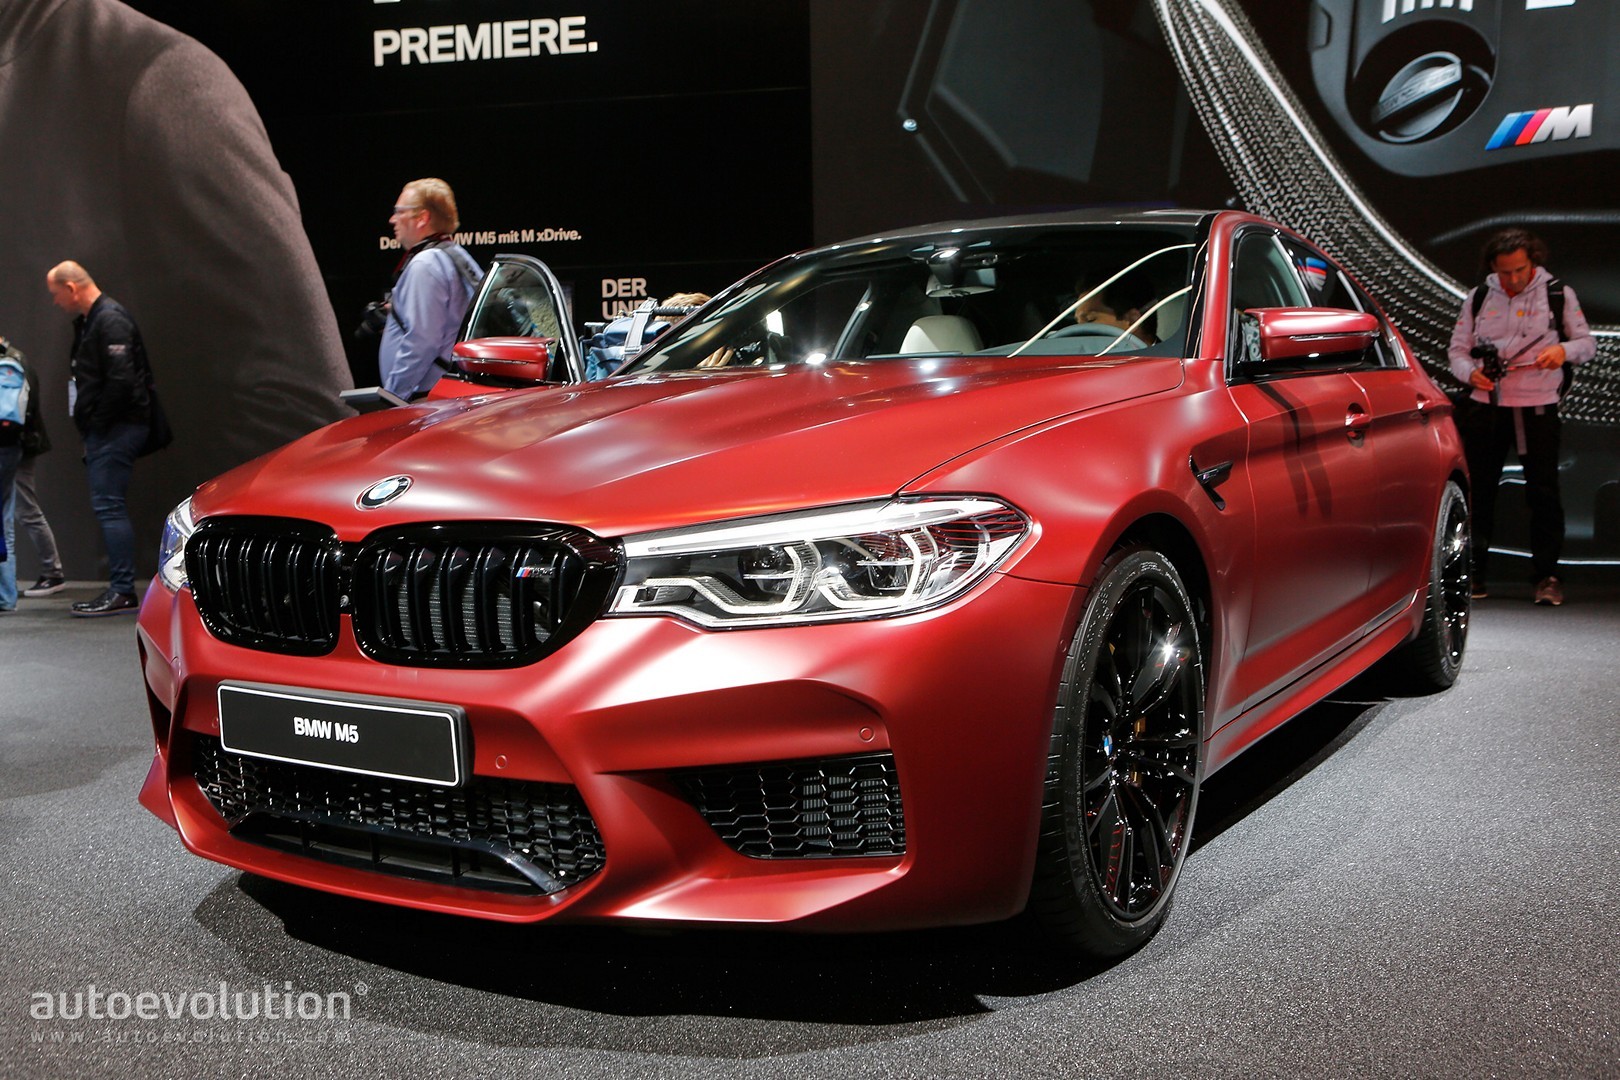 Primitiv Snart Mold 2018 BMW M5 Flaunts 600 HP, AWD and Frozen Red Paint - autoevolution